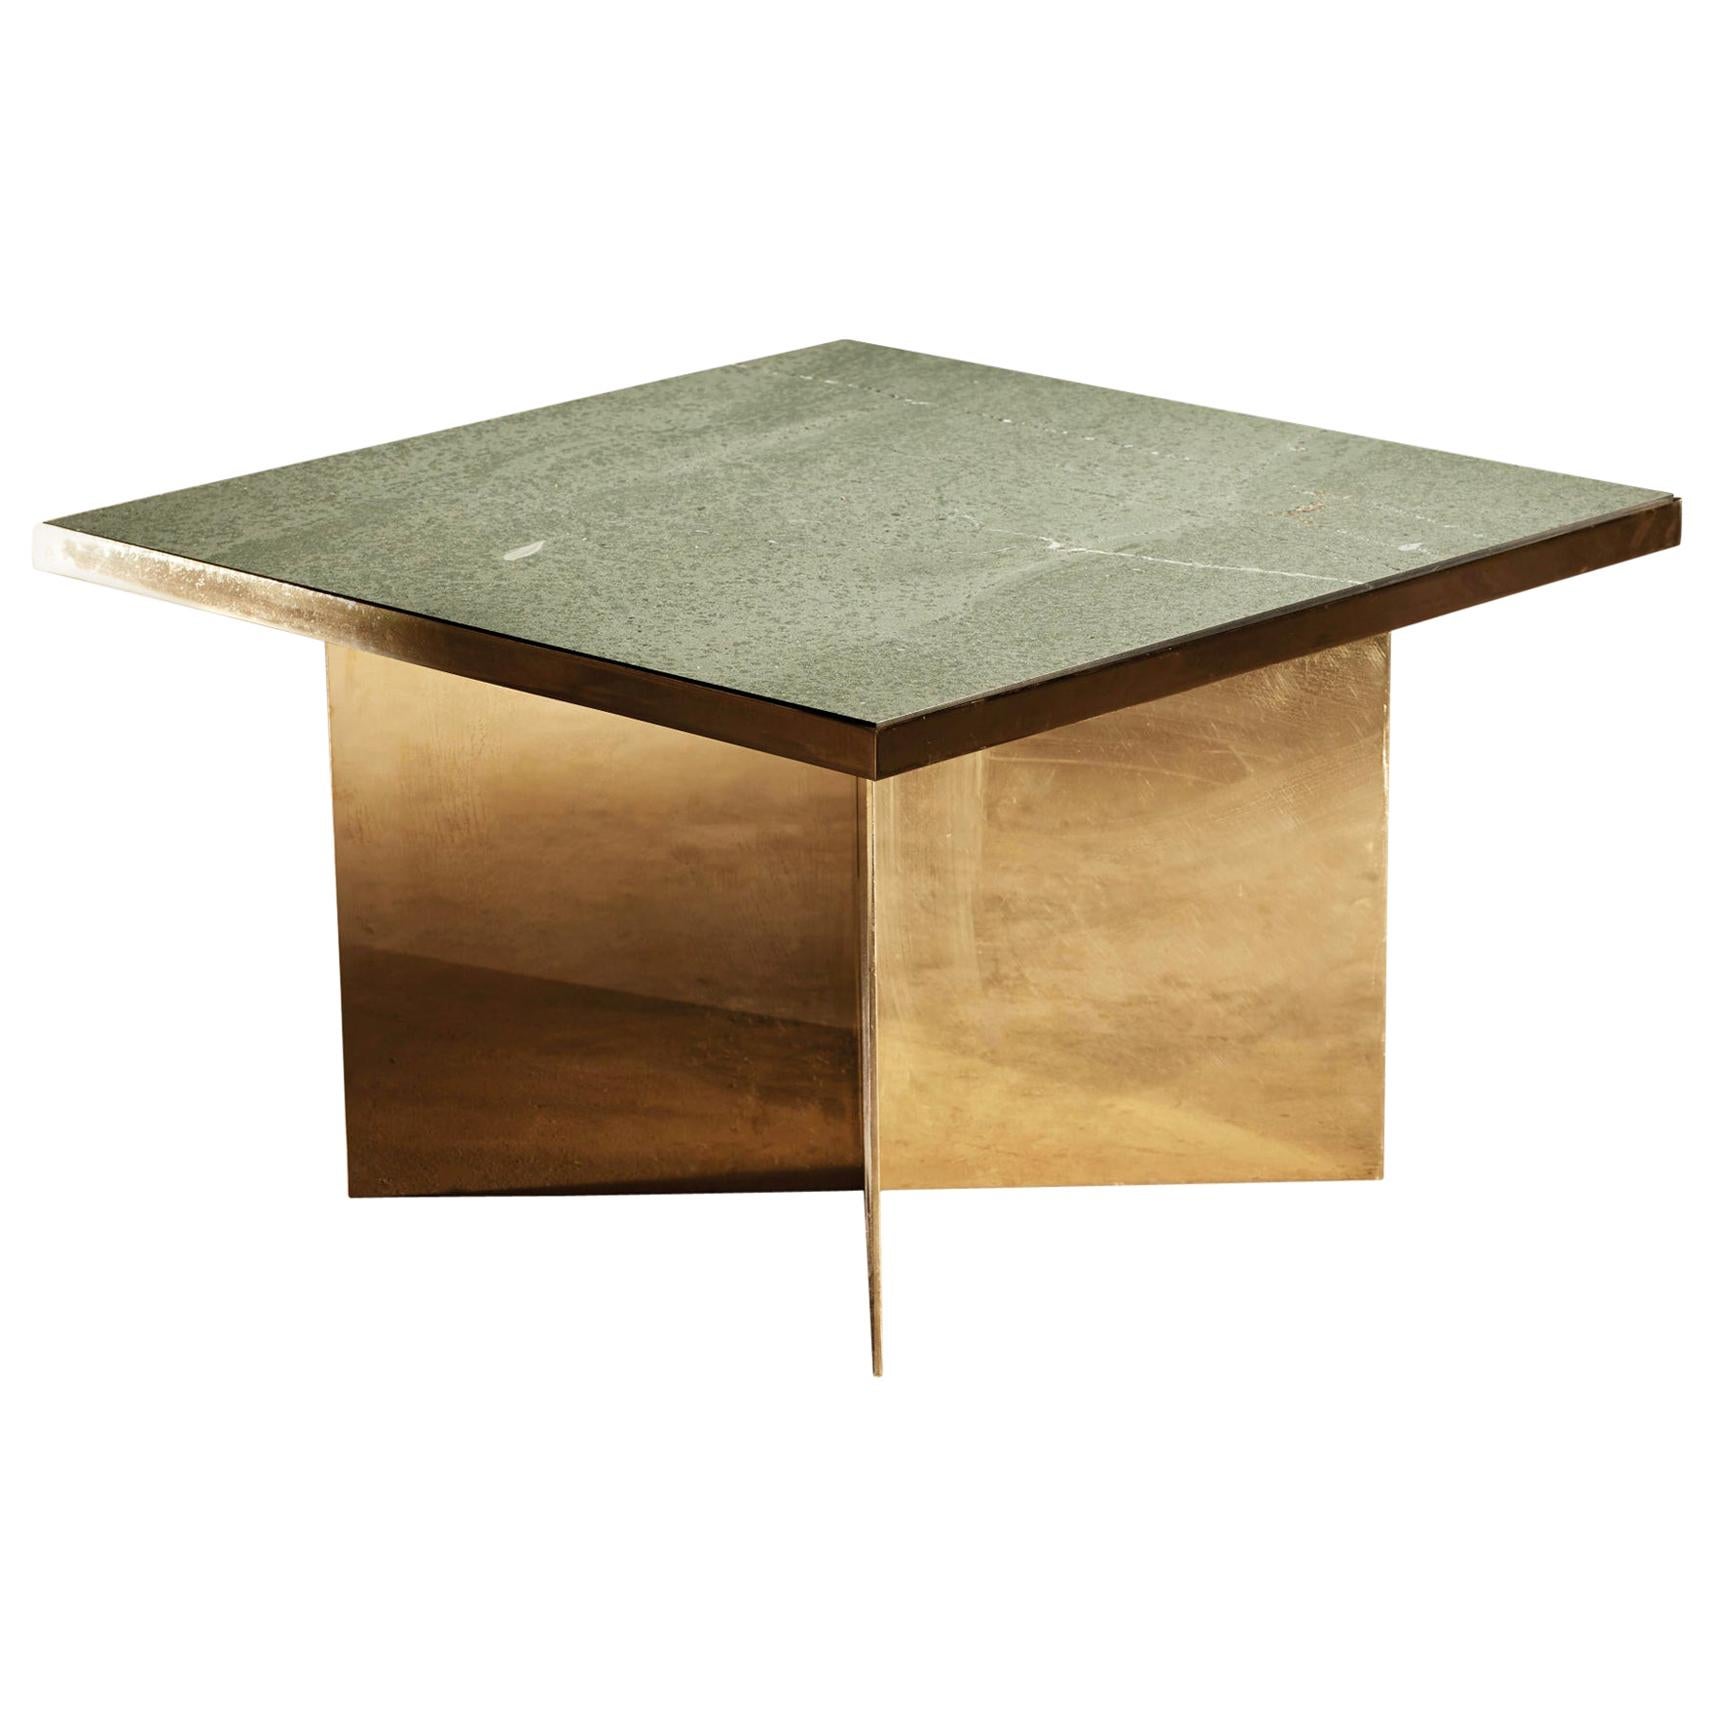 Verdi Green Slate Handcrafted Coffee Table Signed by Novocastrian